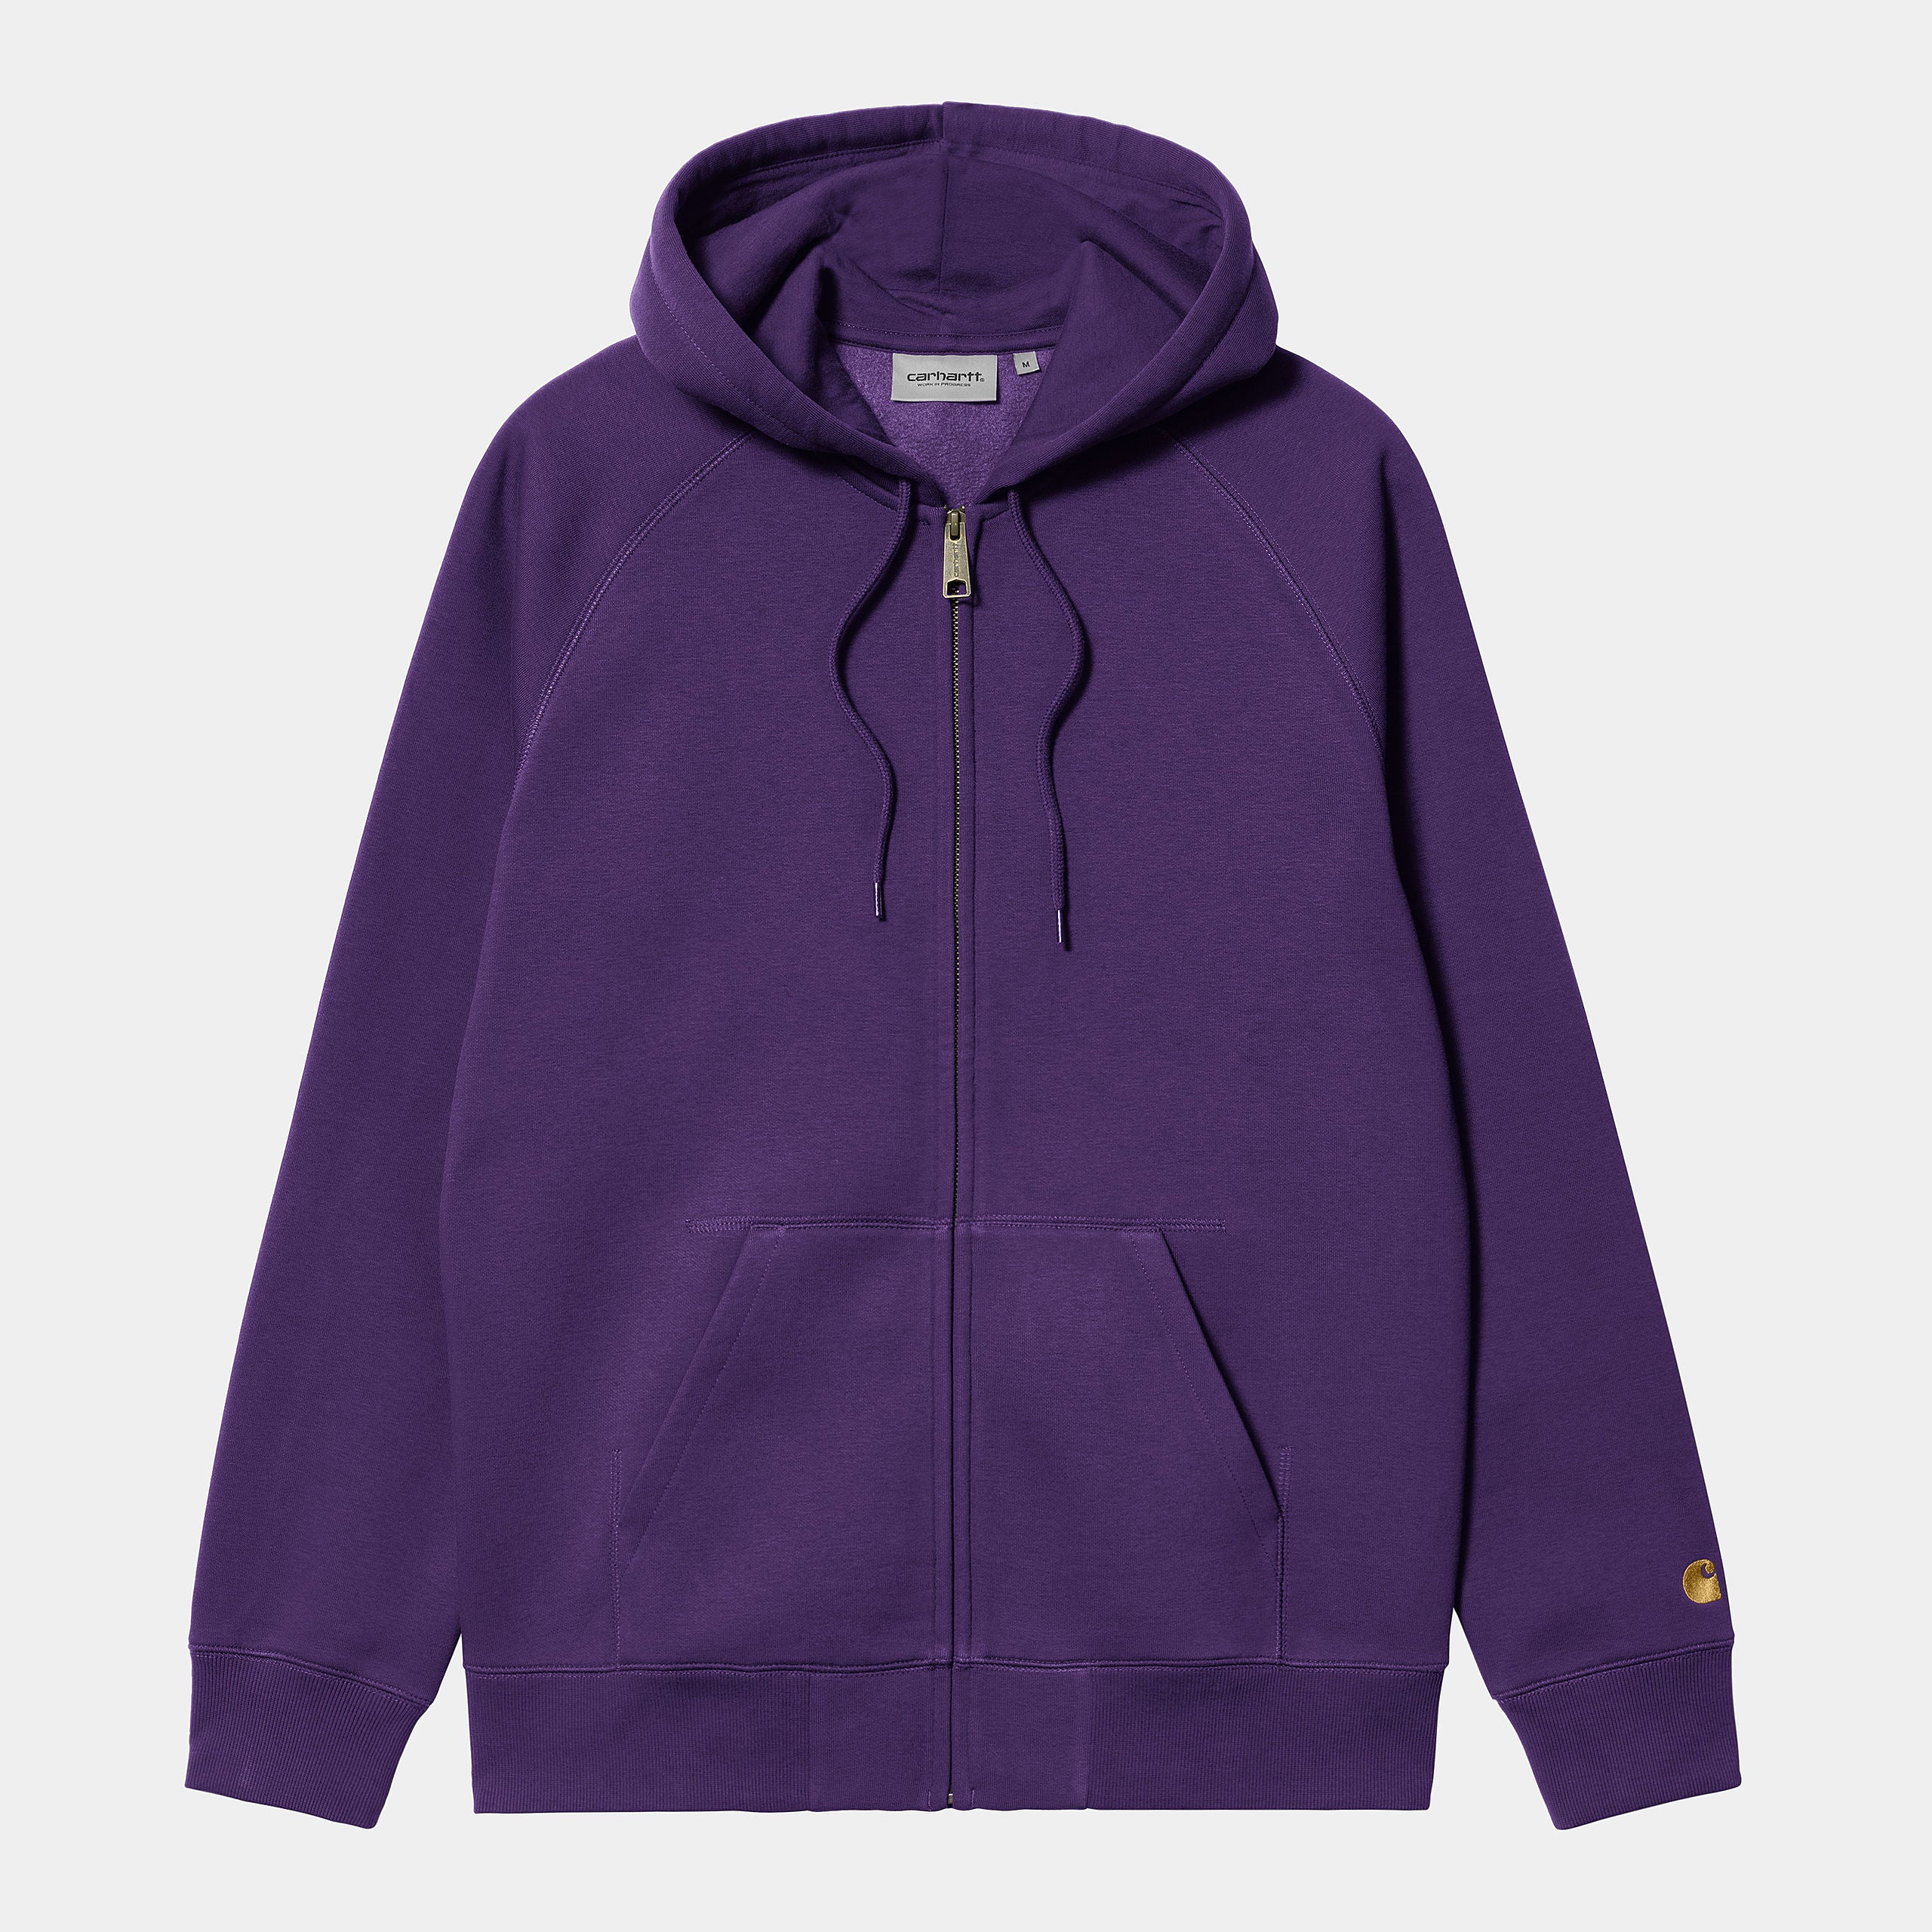 Carhartt WIP Mens Hooded Chase Jacket - Tyrian